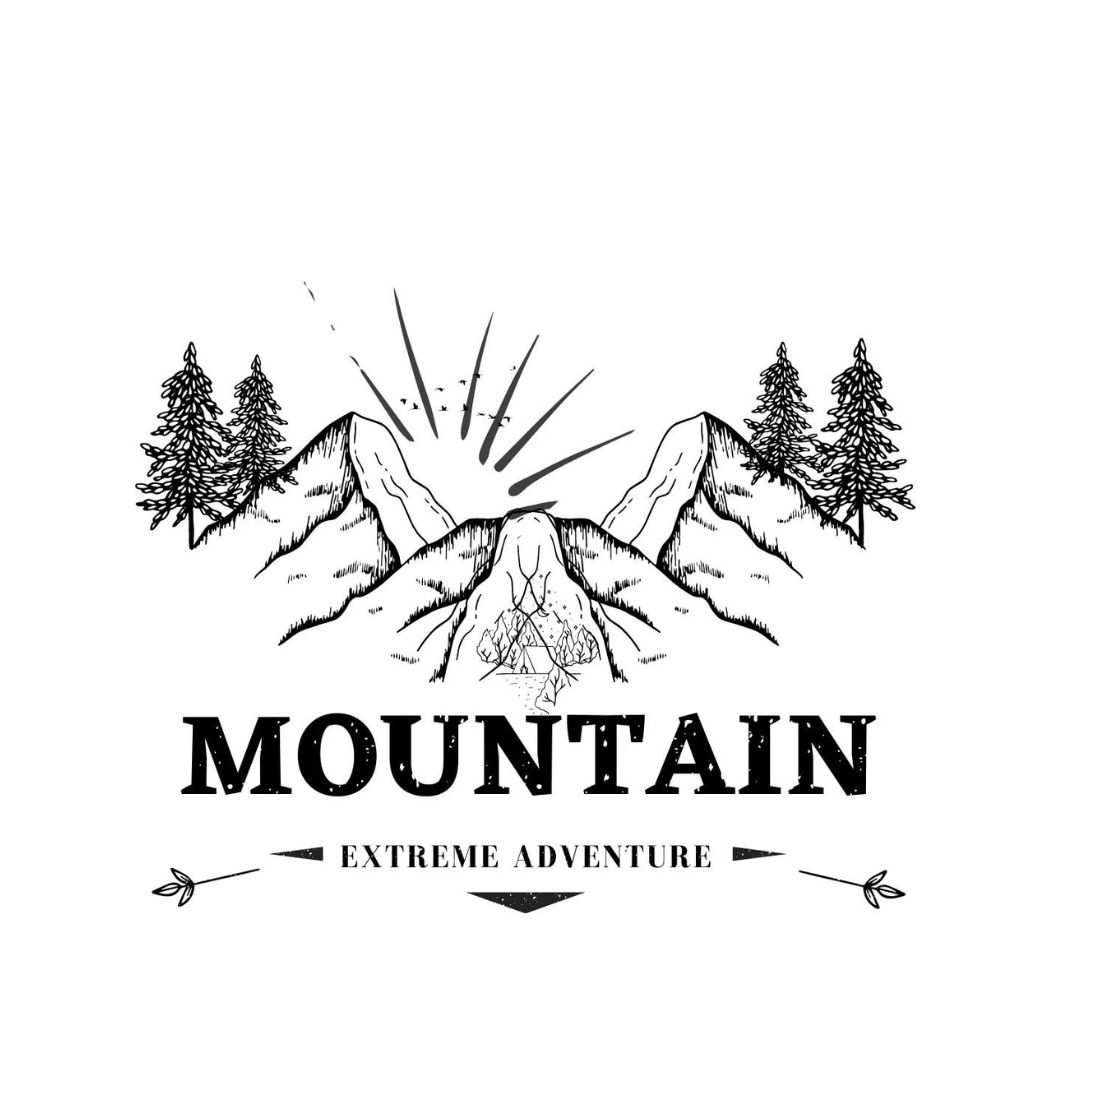 I create adventure, vintage and mountains logo preview image.